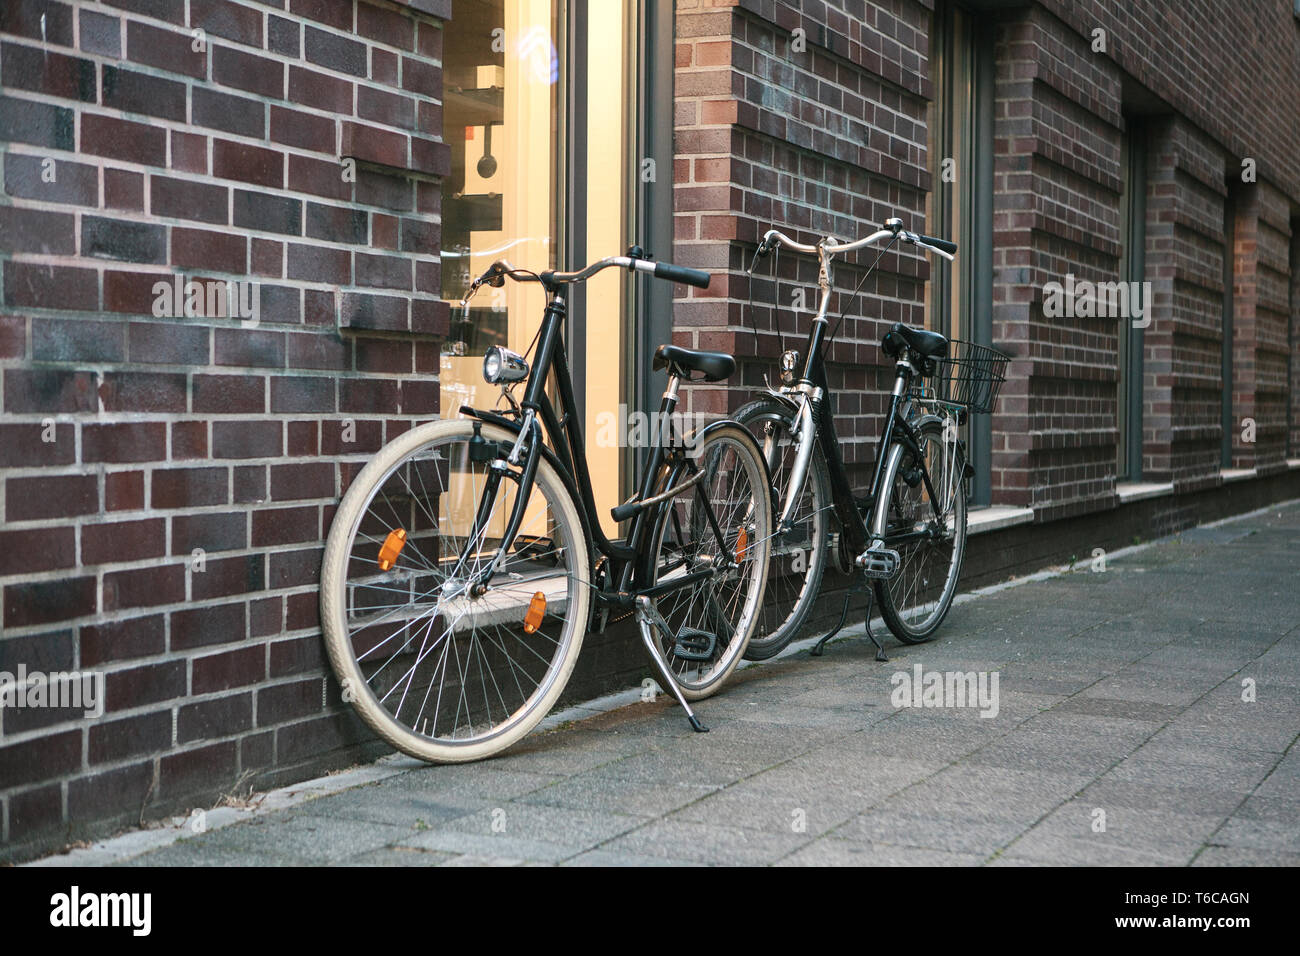 Bicycles are parked next to a brick wall of a building on a city street. Stock Photo